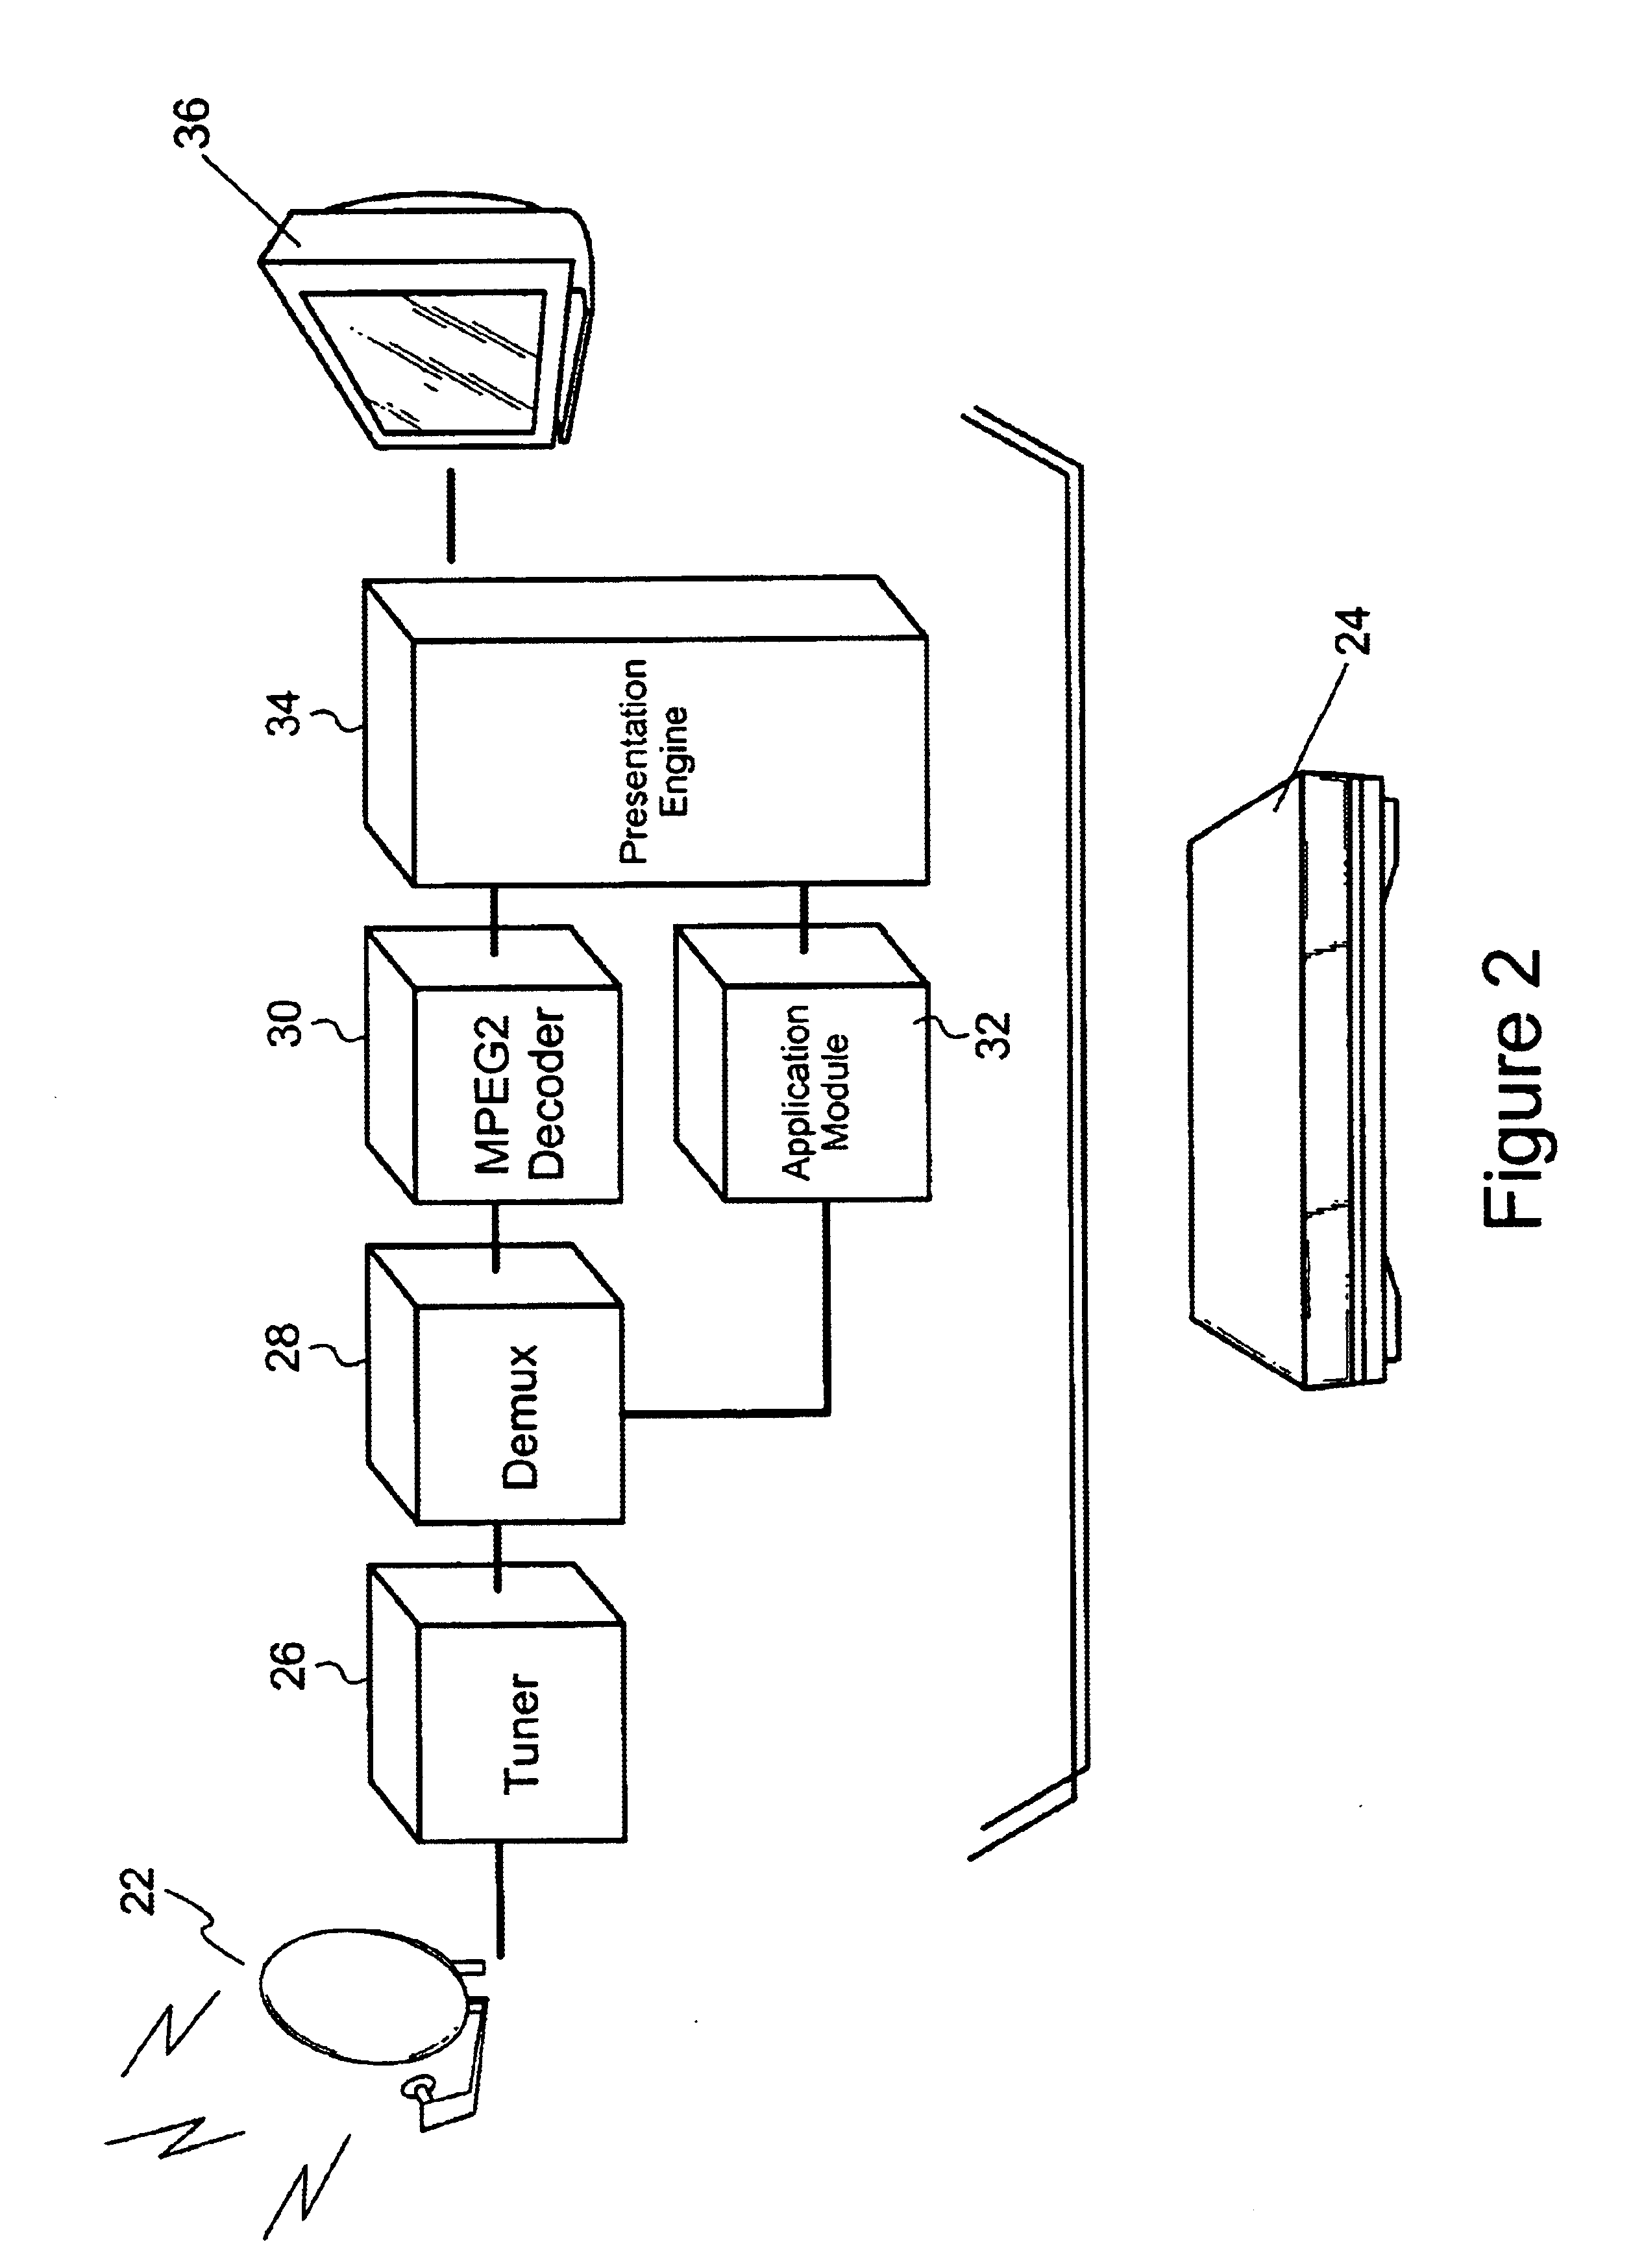 Method and apparatus for a declarative representation of distortion correction for add-on graphics in broadcast video